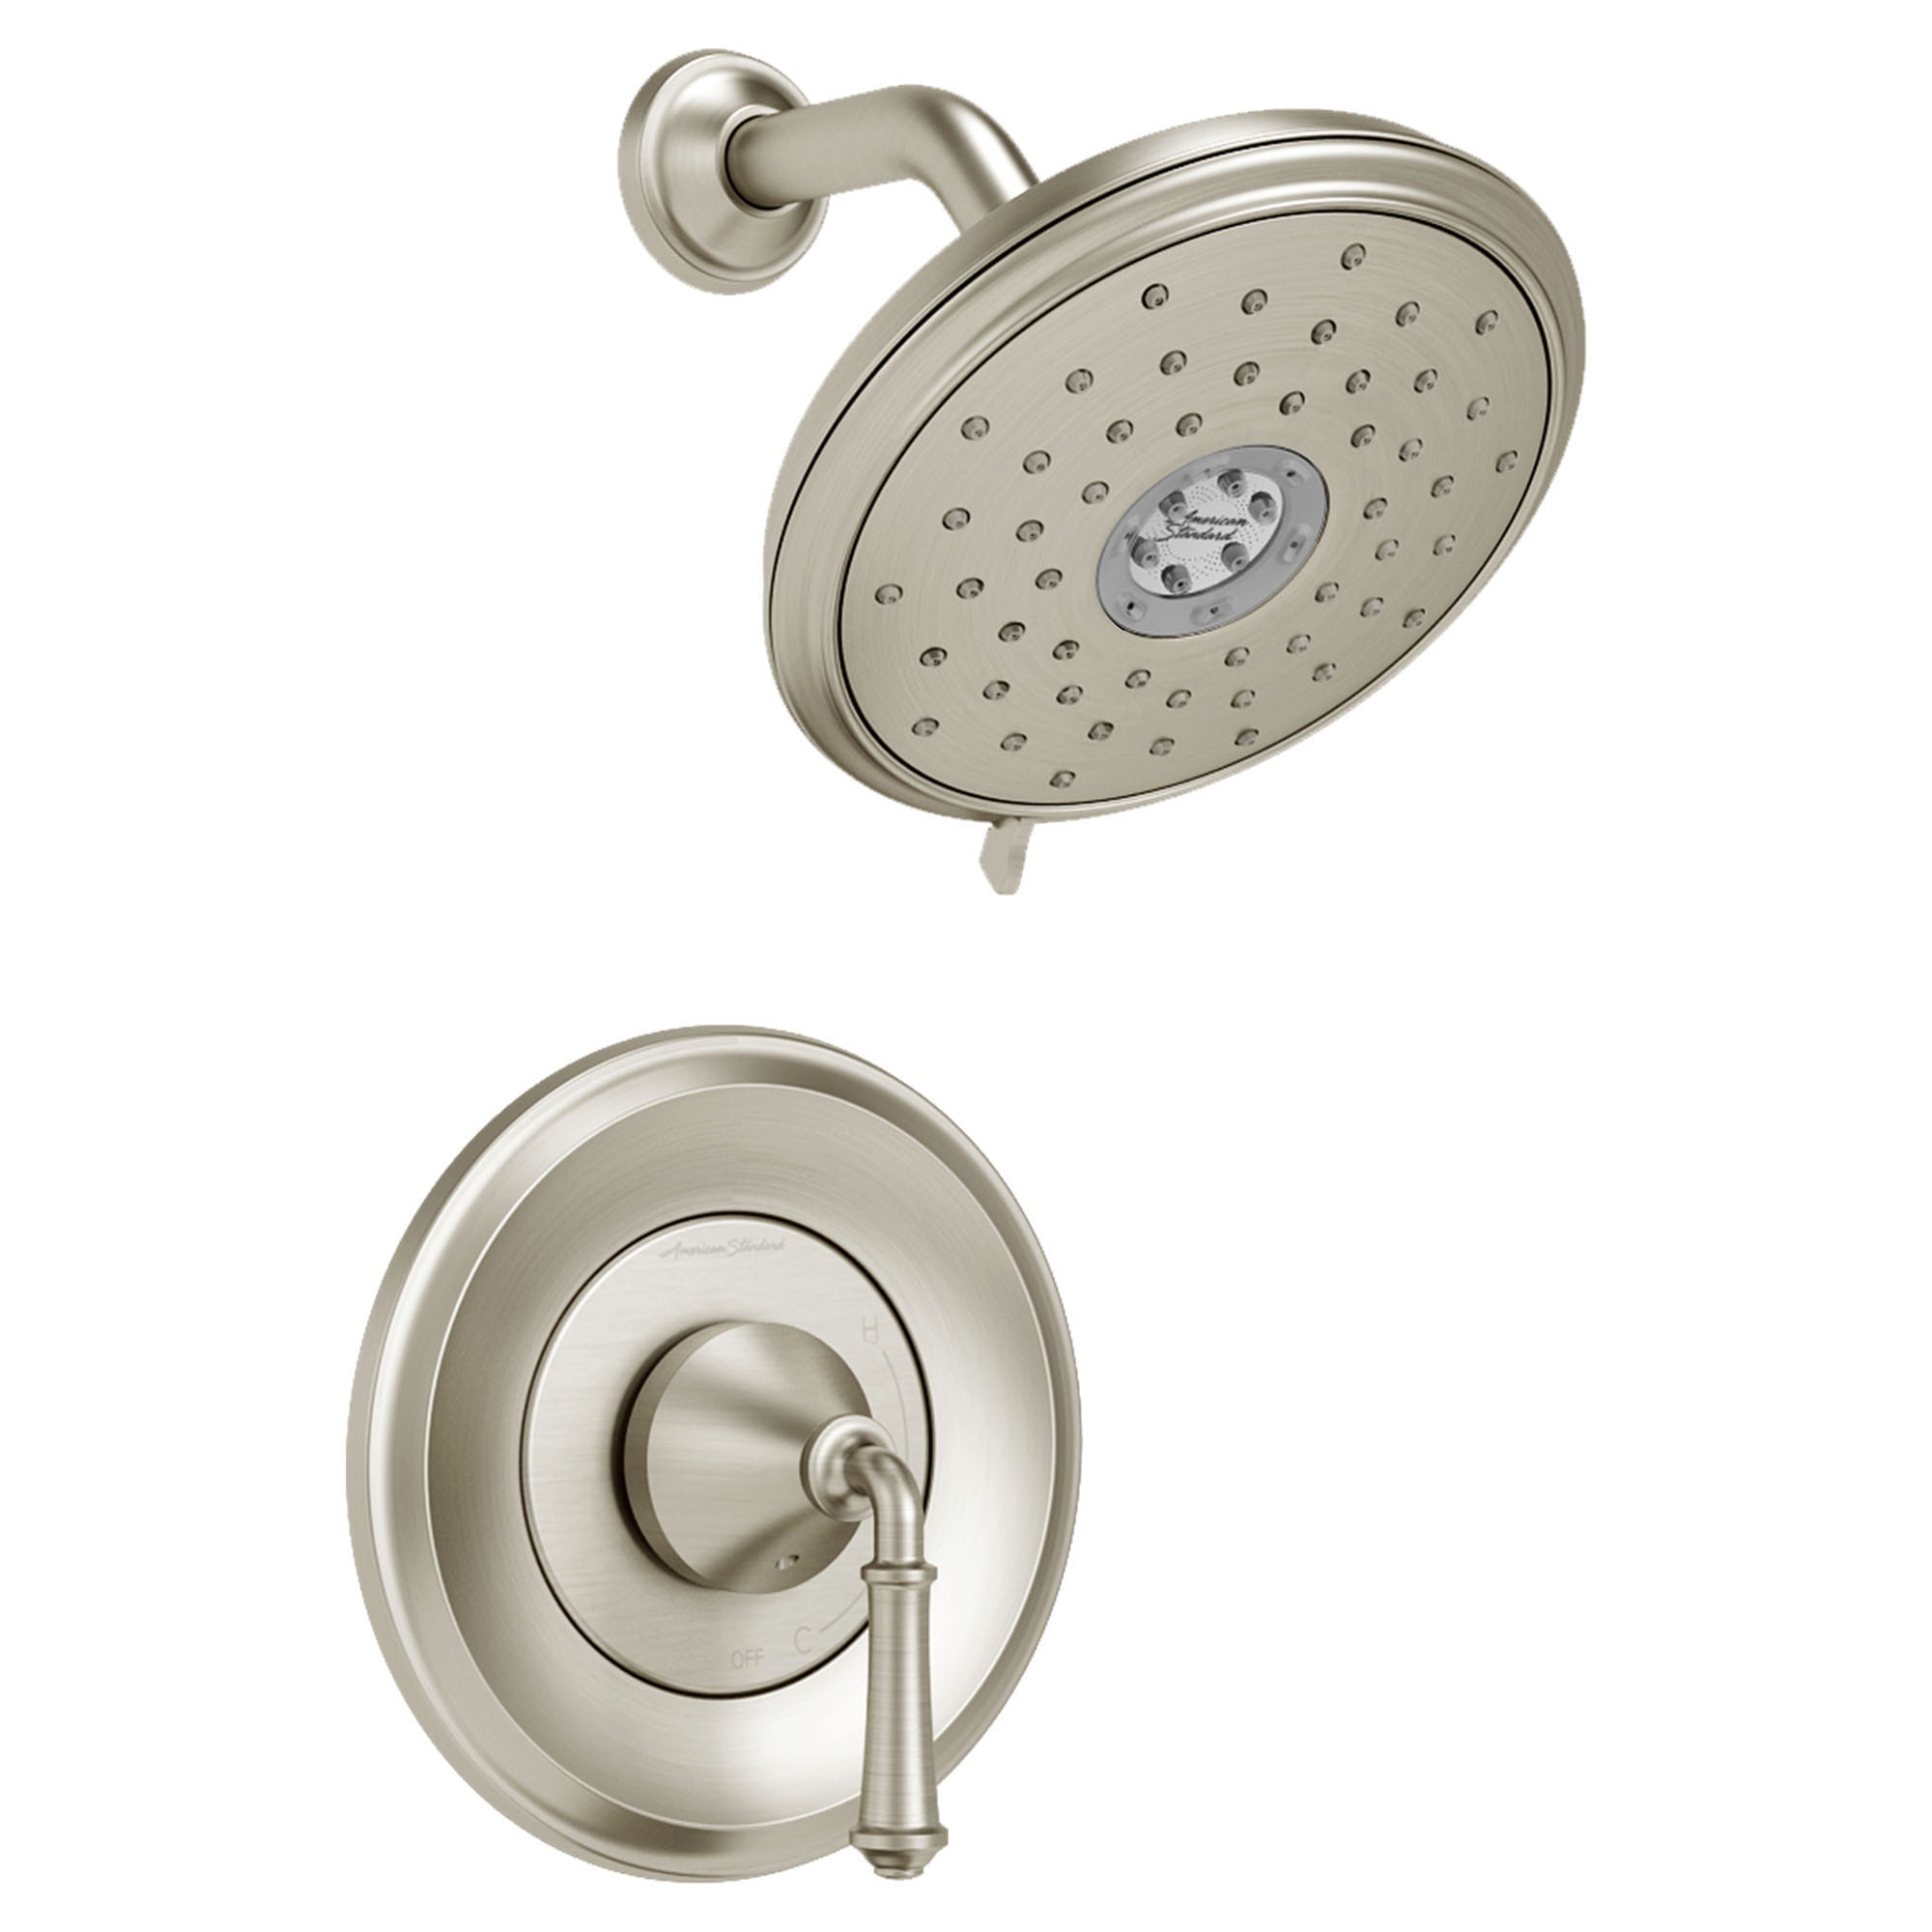 Delancey 18 gpm 68 L min Shower Trim Kit With Water Saving 4 Function Showerhead and Lever Handle BRUSHED NICKEL